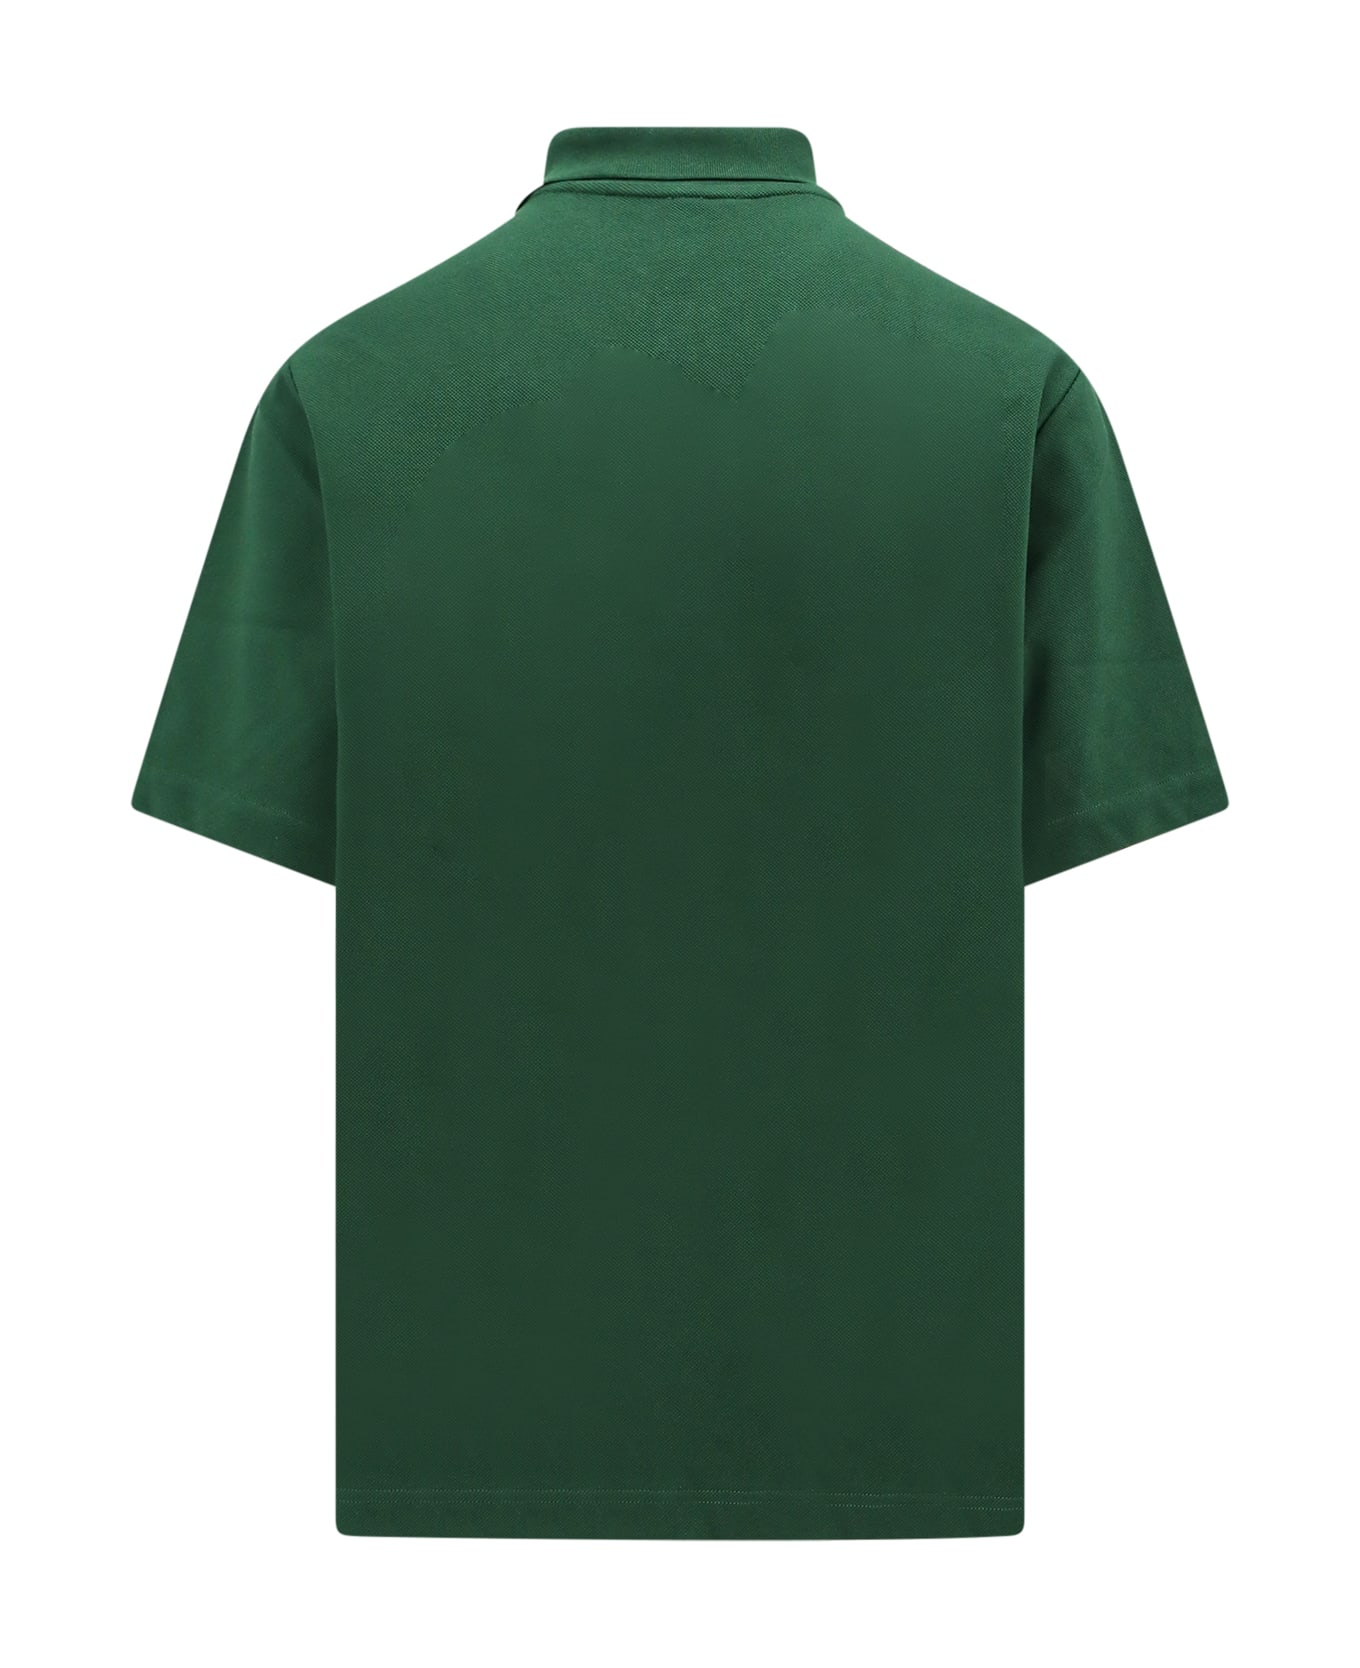 Burberry Polo Shirt - Green ポロシャツ